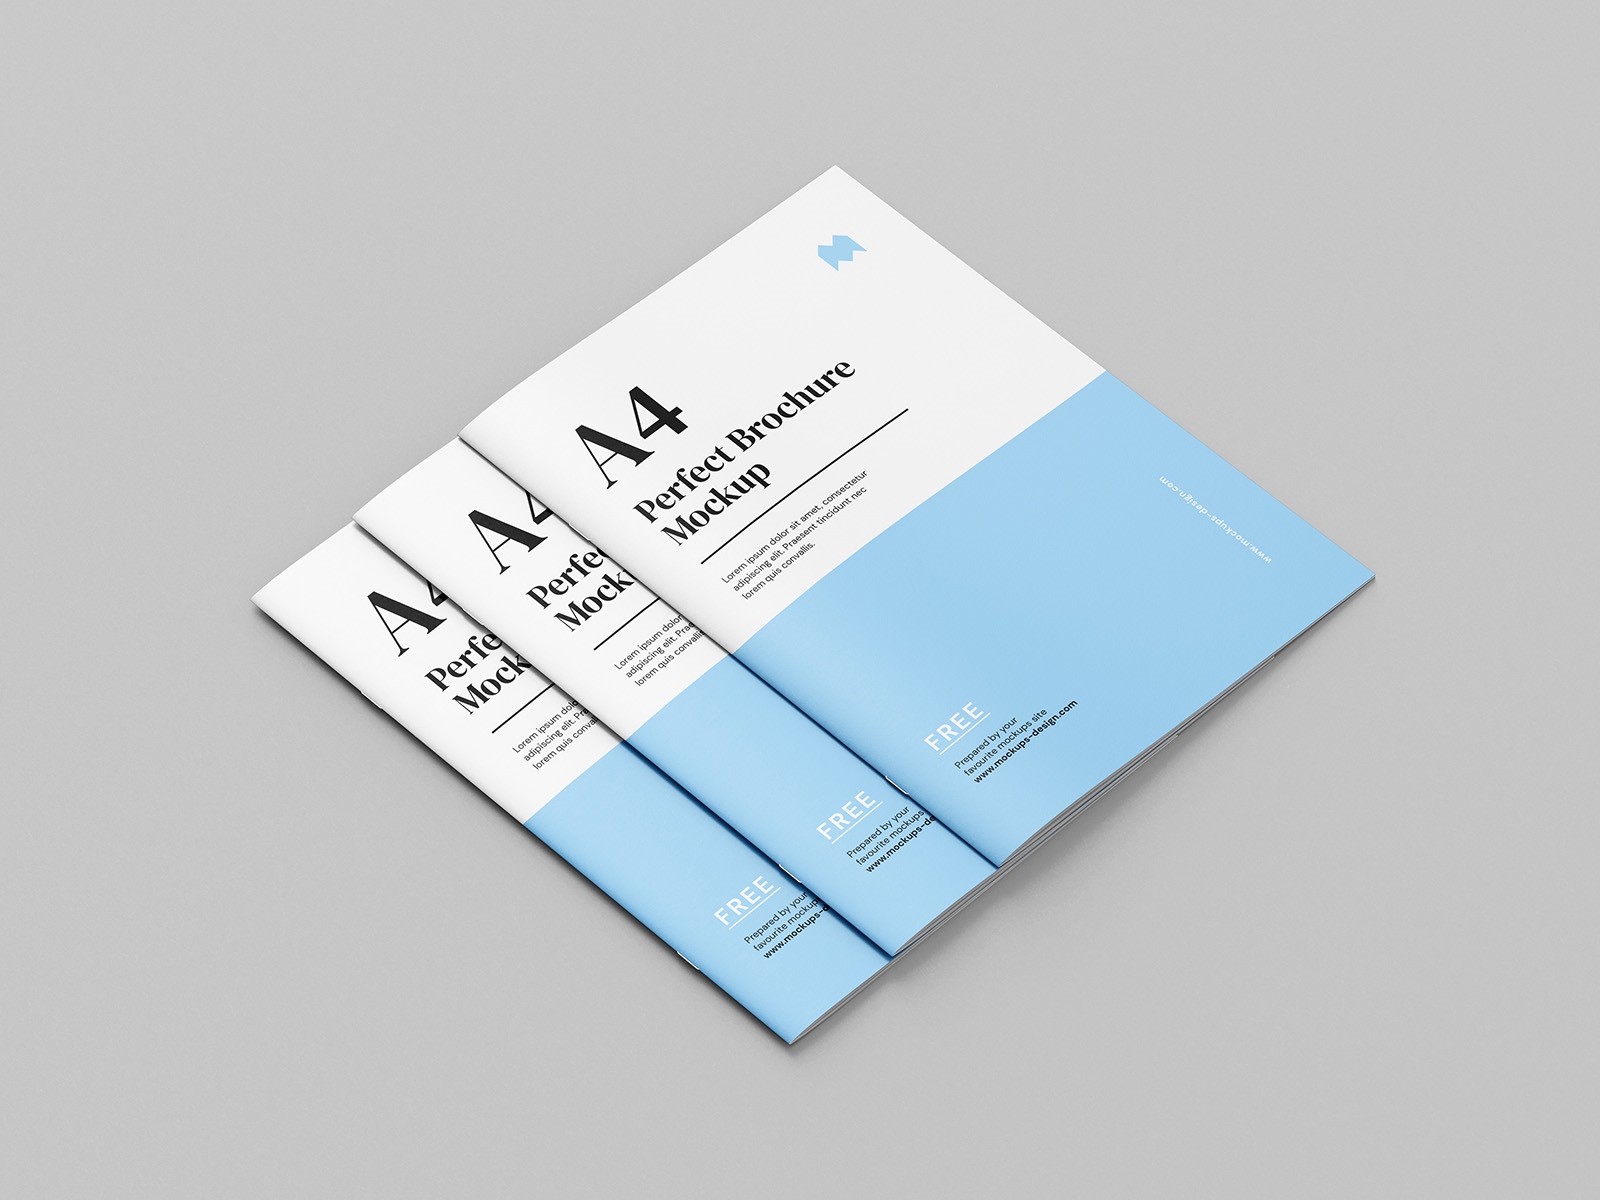 8 Mockups of Thin A4 Brochure from Different Angles FREE PSD